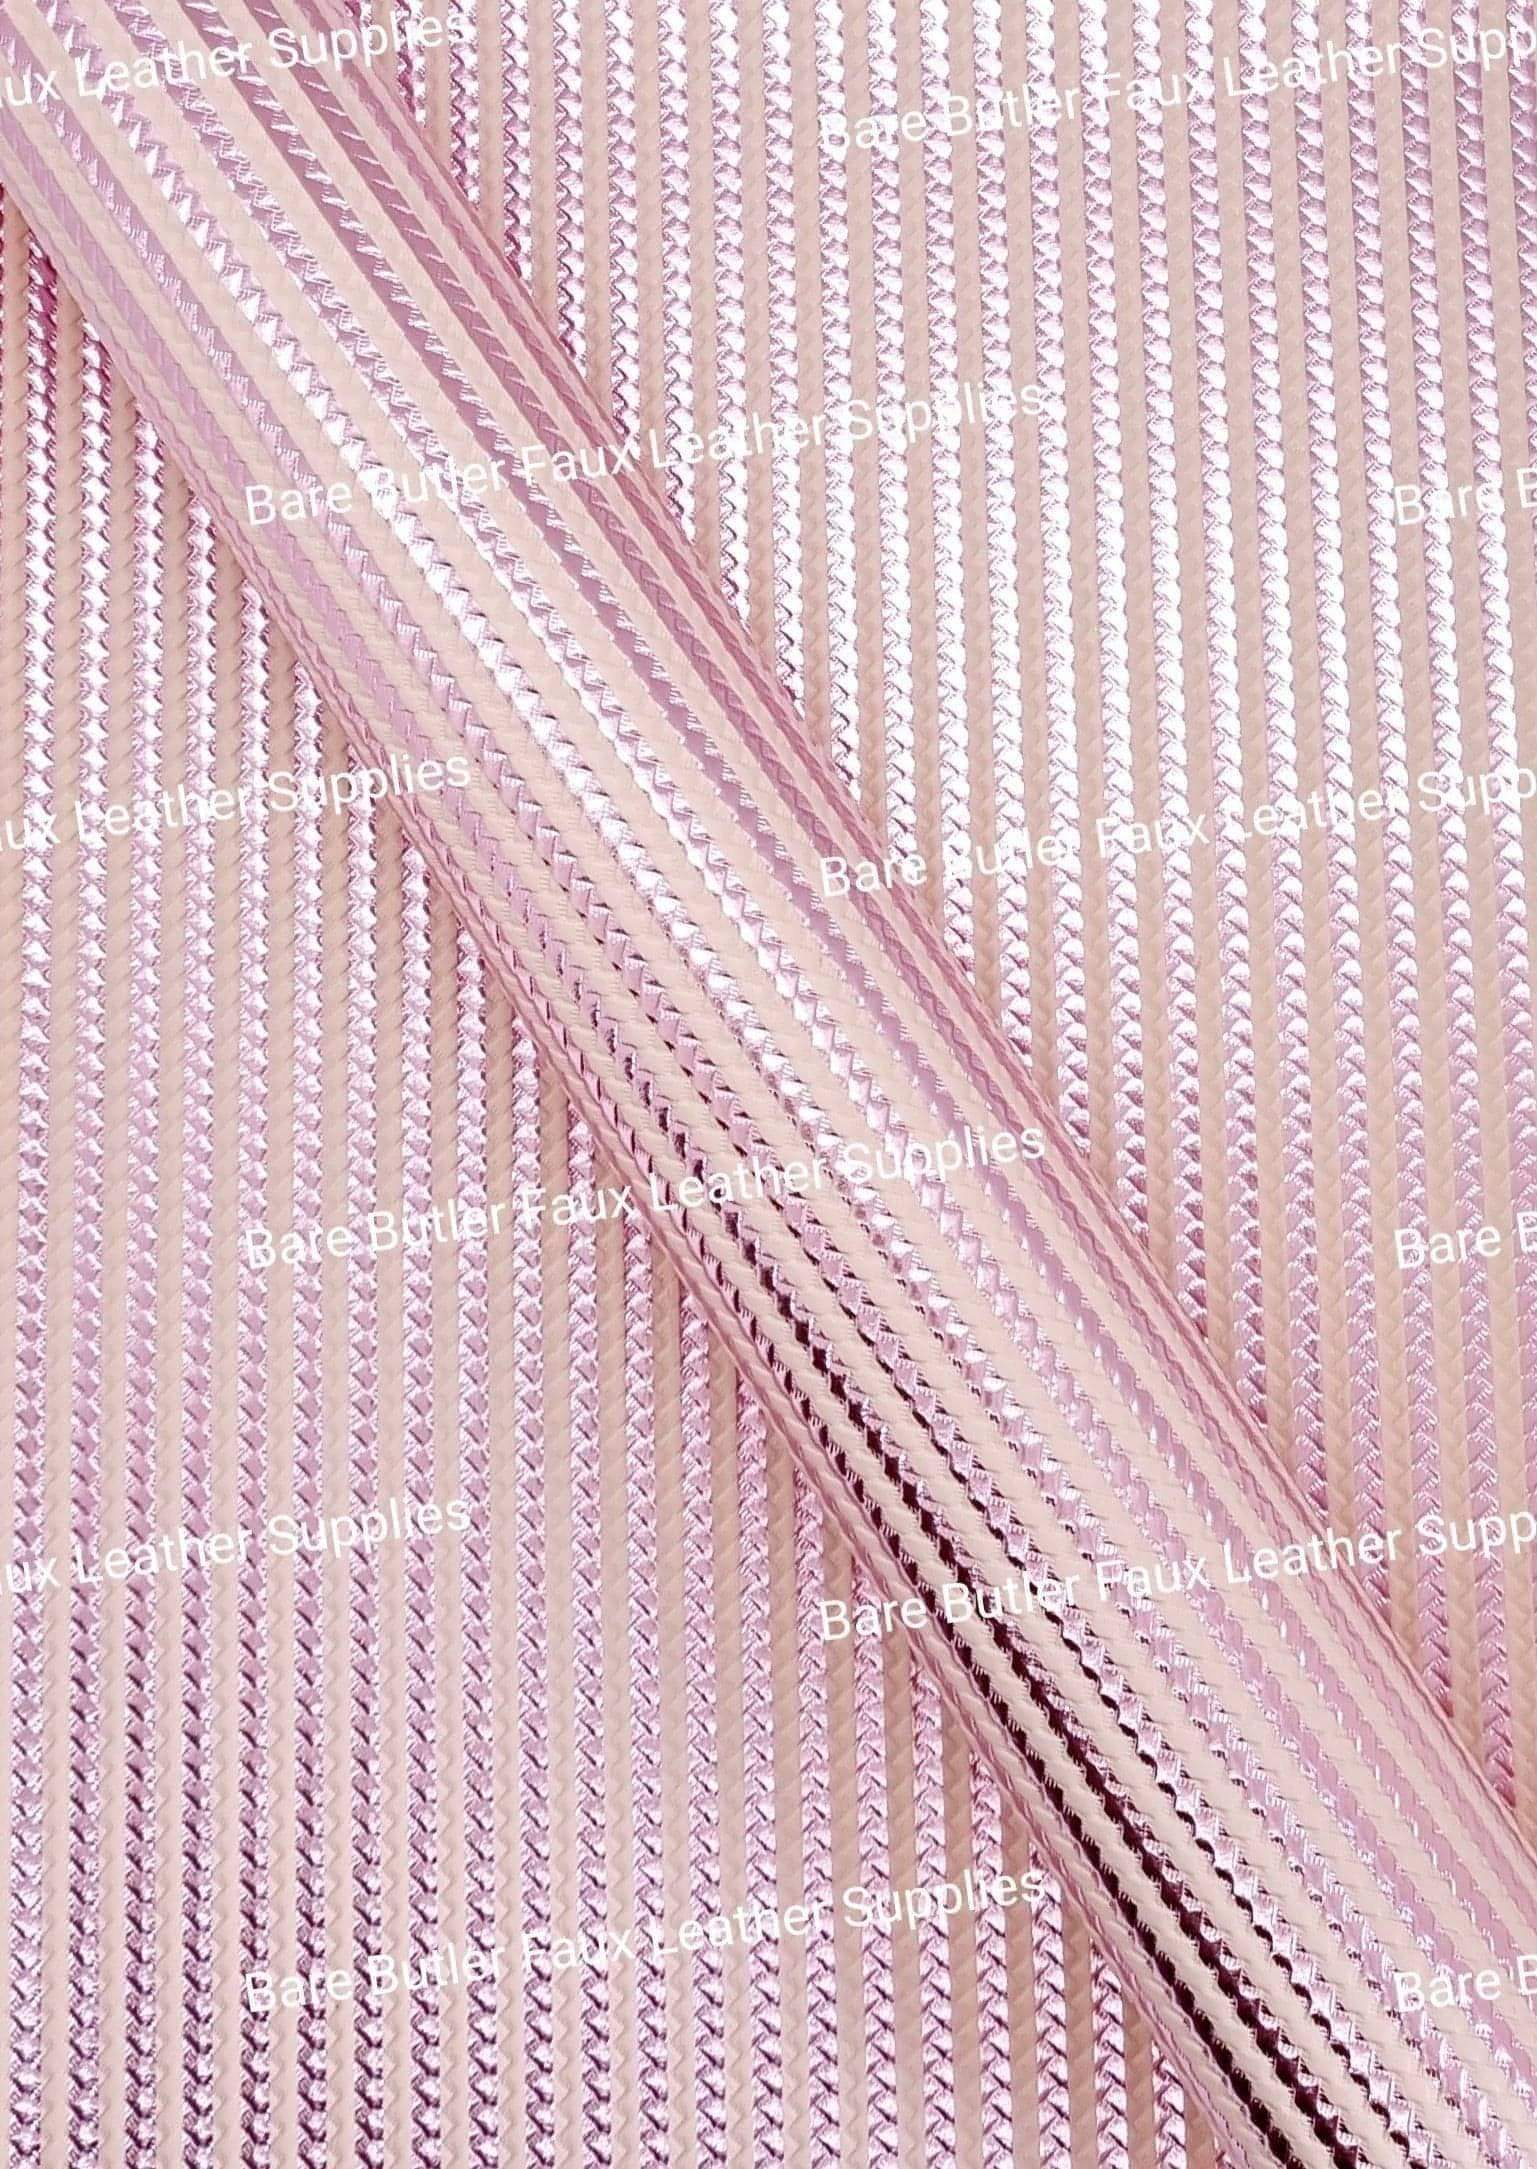 Metallic Embossed Weave Pink and Peach - Faux, Faux Leather, Floral, Glitter - Bare Butler Faux Leather Supplies 